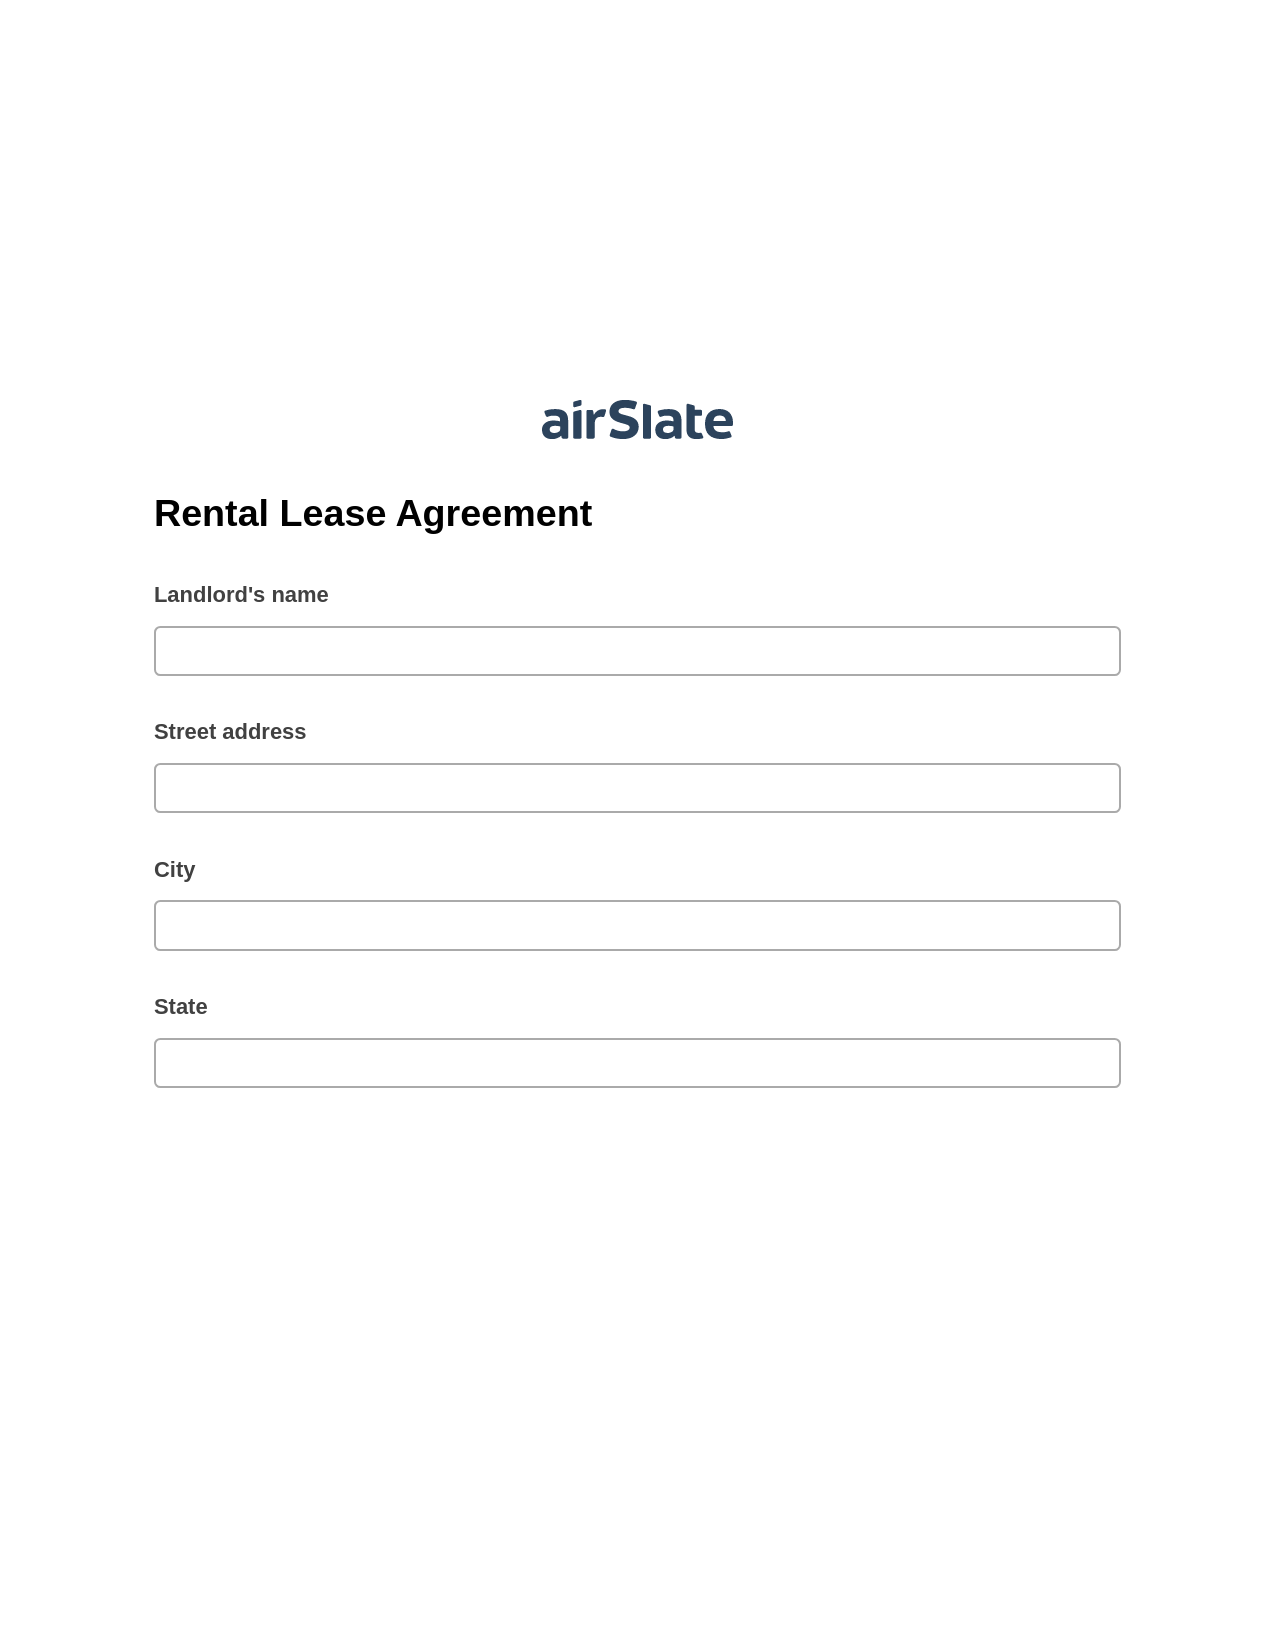 Multirole Rental Lease Agreement Pre-fill from another Slate Bot, Document Hide Bot, Google Drive Bot